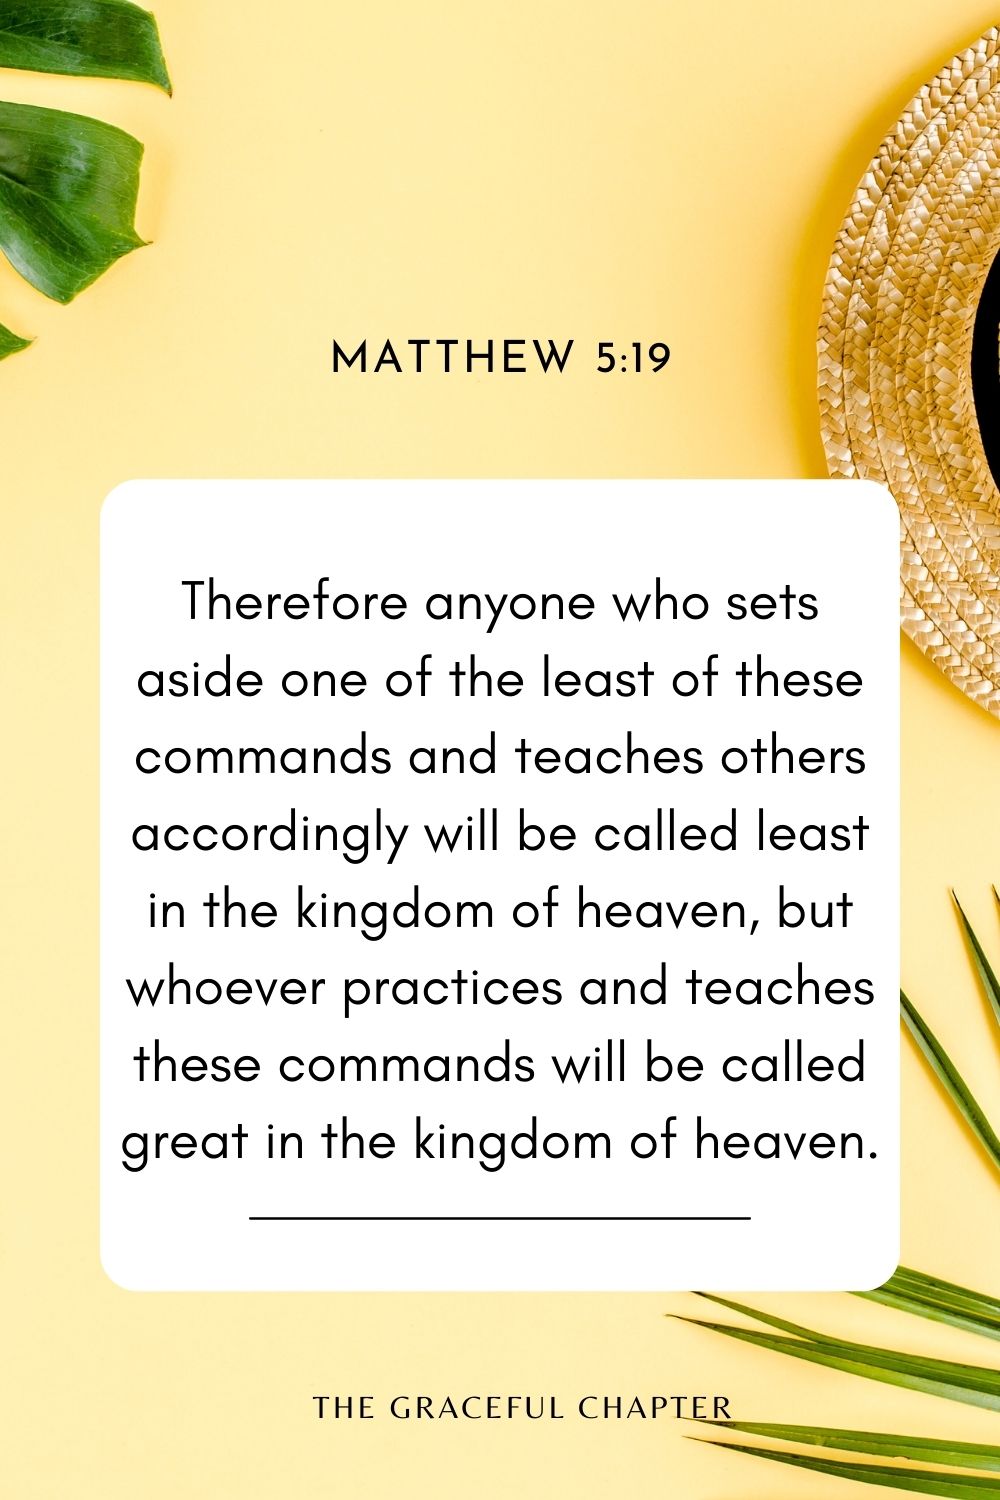 Therefore anyone who sets aside one of the least of these commands and teaches others accordingly will be called least in the kingdom of heaven, but whoever practices and teaches these commands will be called great in the kingdom of heaven. Matthew 5:19